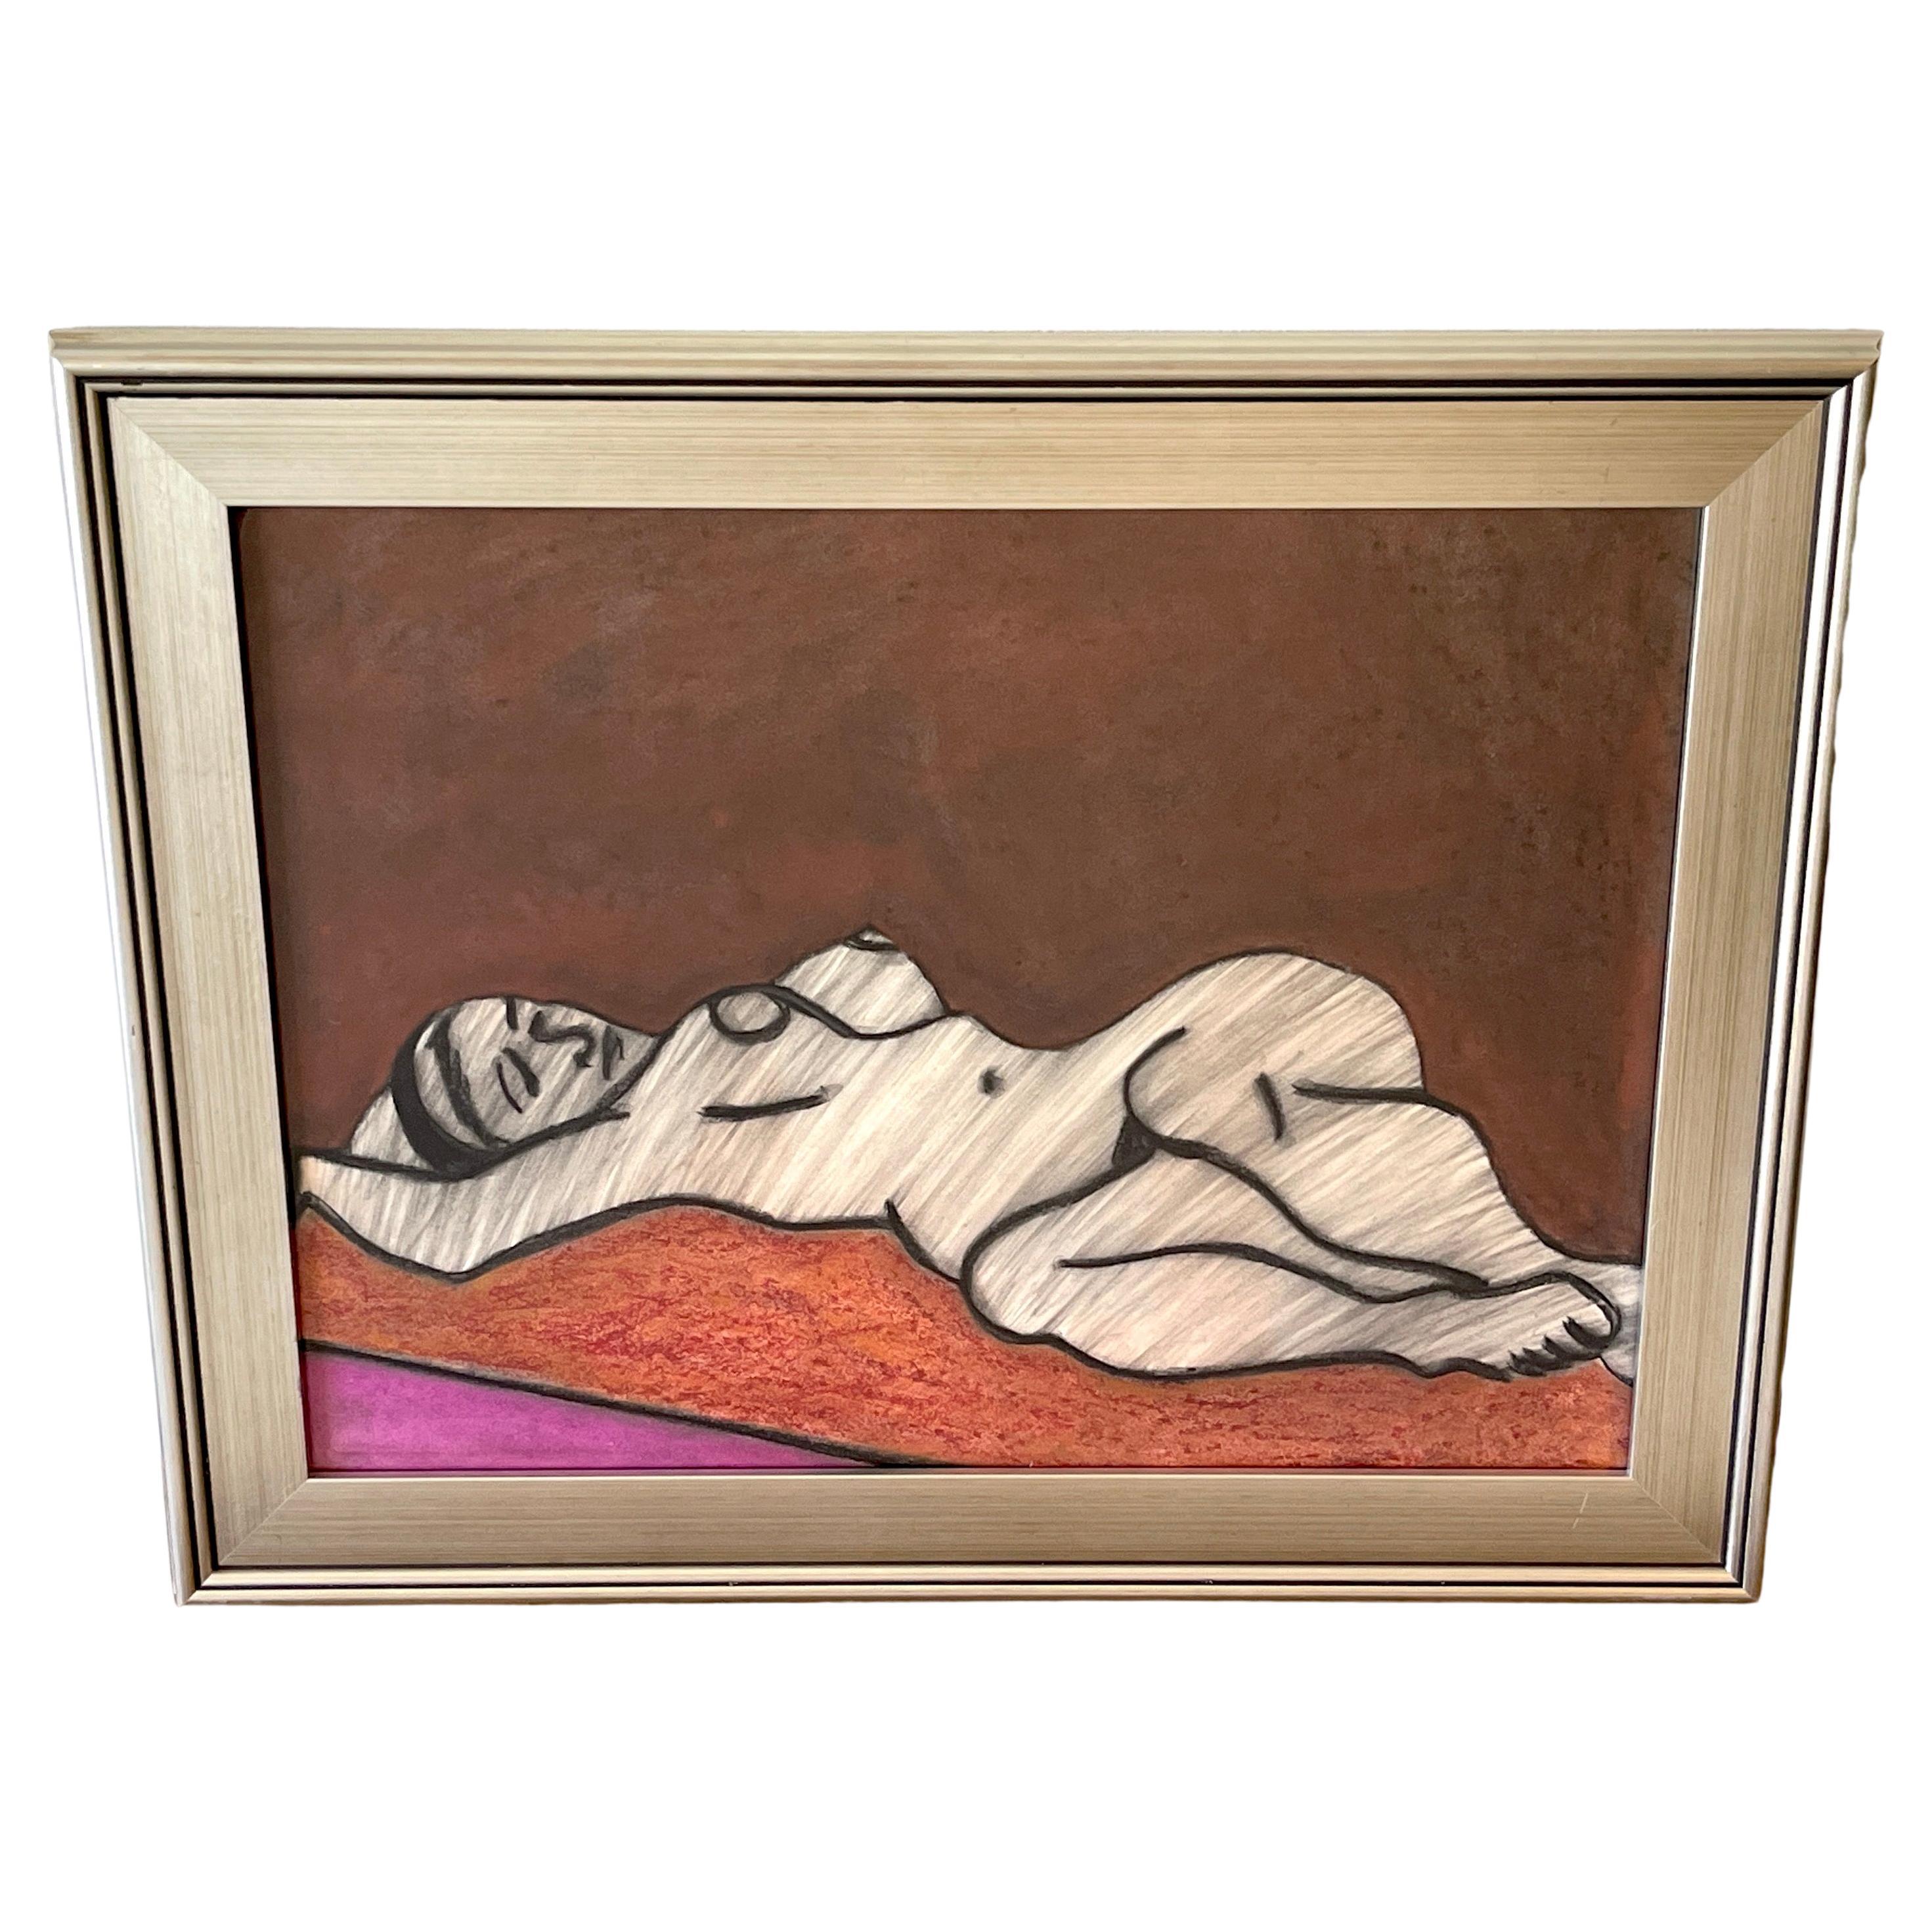 'Odalisque' Oil/Mixed Media on Paper, 1960s by Douglas D. Peden  For Sale